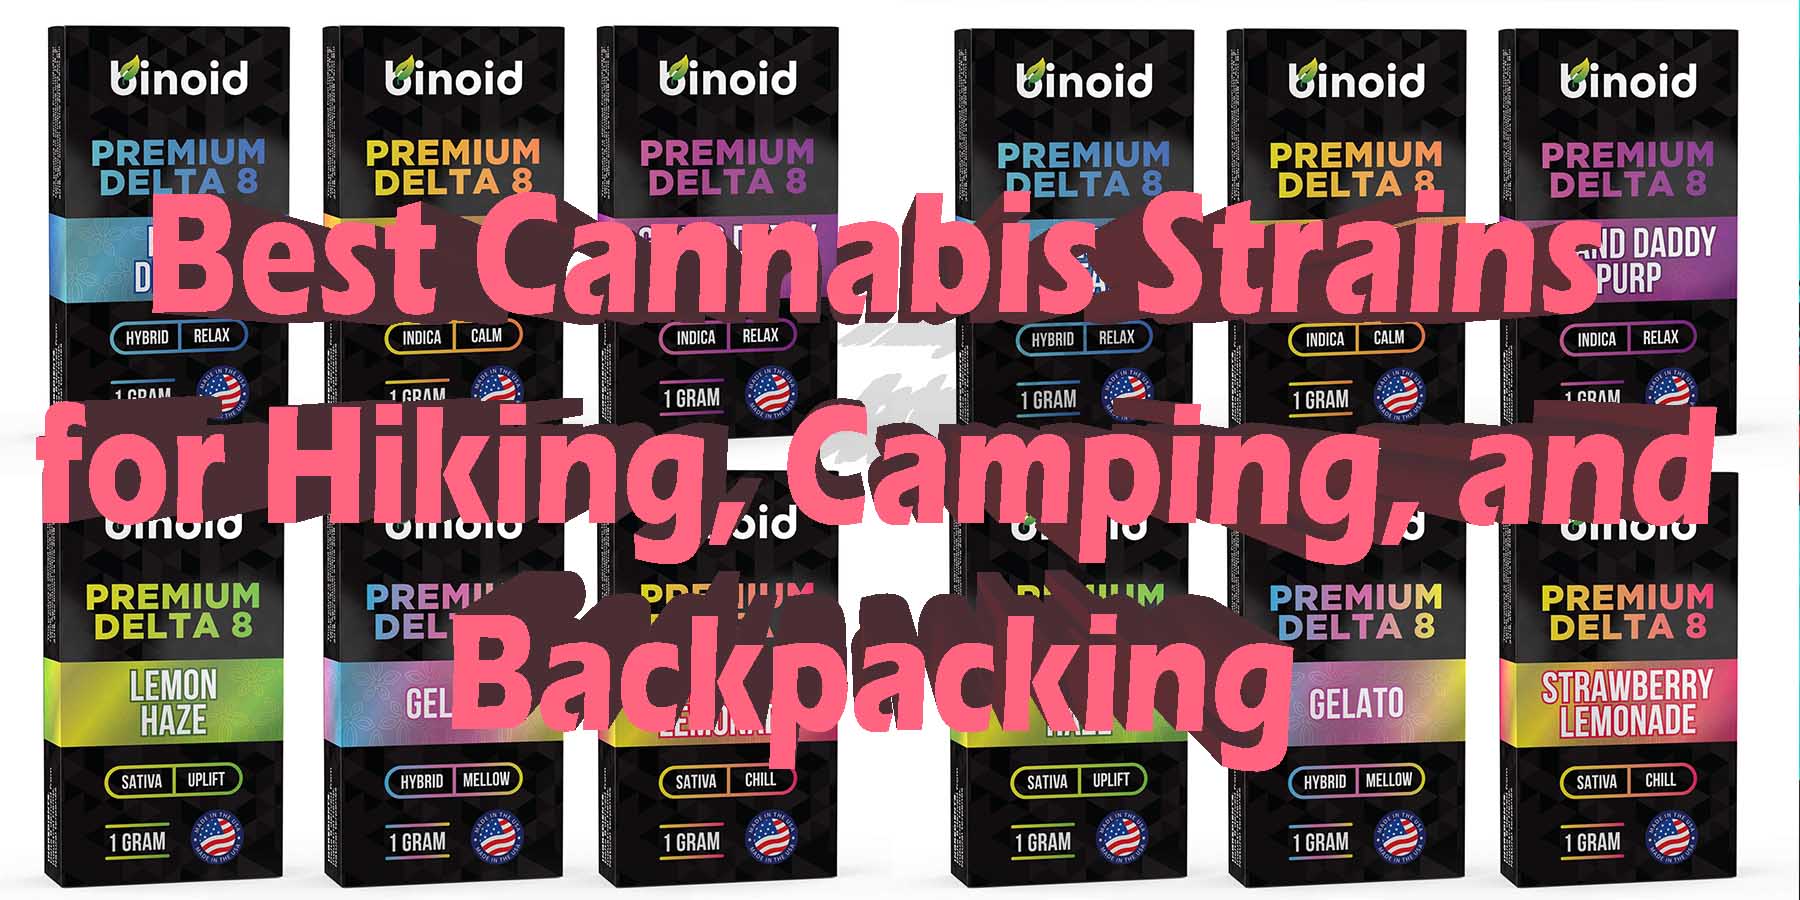 Best-Cannabis-Strains-for-Hiking-Camping-and-Backpacking-WhereToGet-HowToGetNearMe-BestPlace LowestPrice Coupon Discount For Smoking Best High Smoke Shop Online Near me Binoid